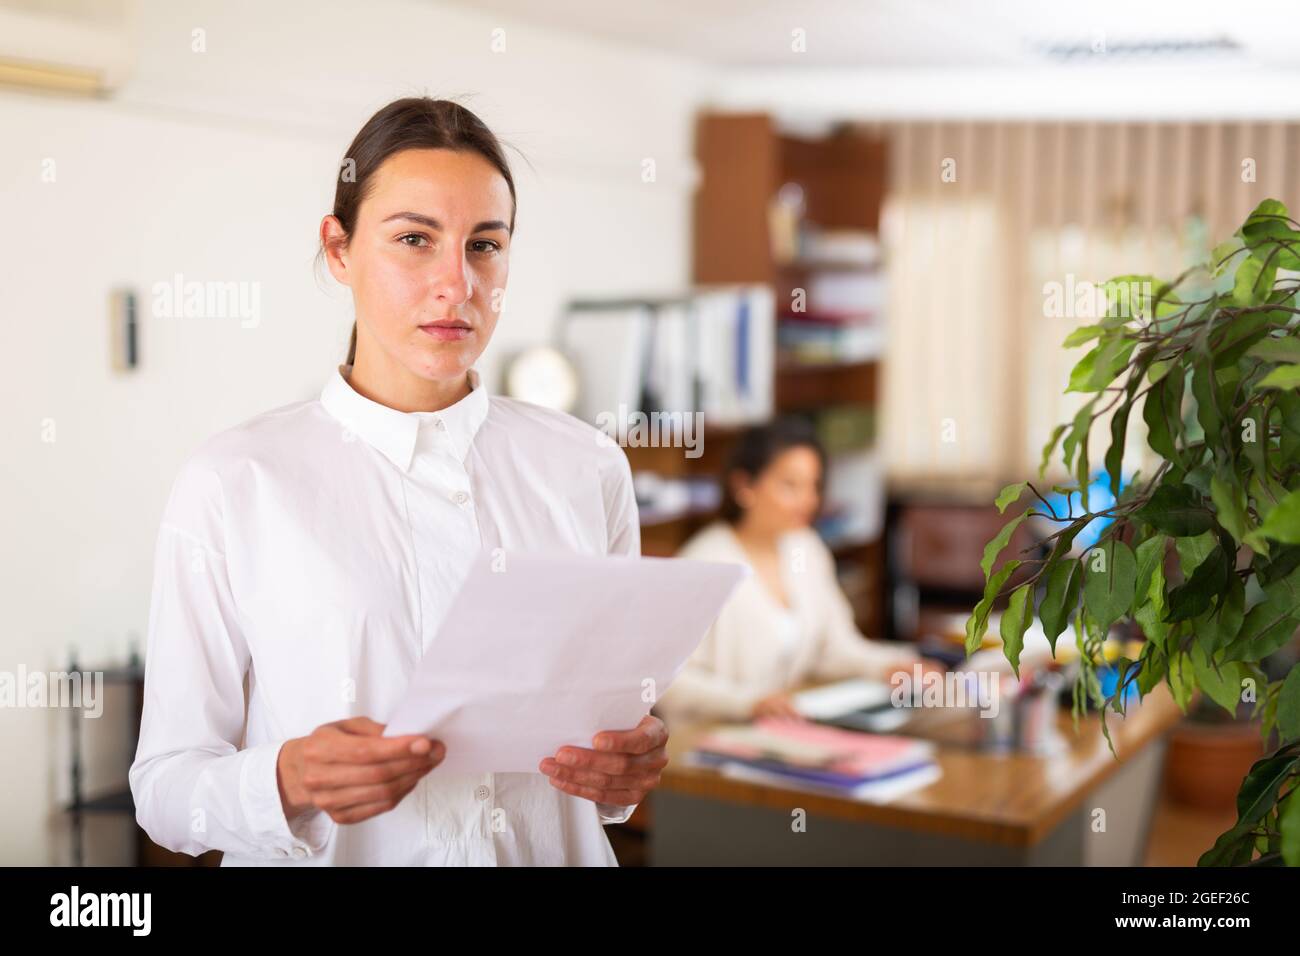 Unhappy female office employee after reprimand from angry chief Stock Photo